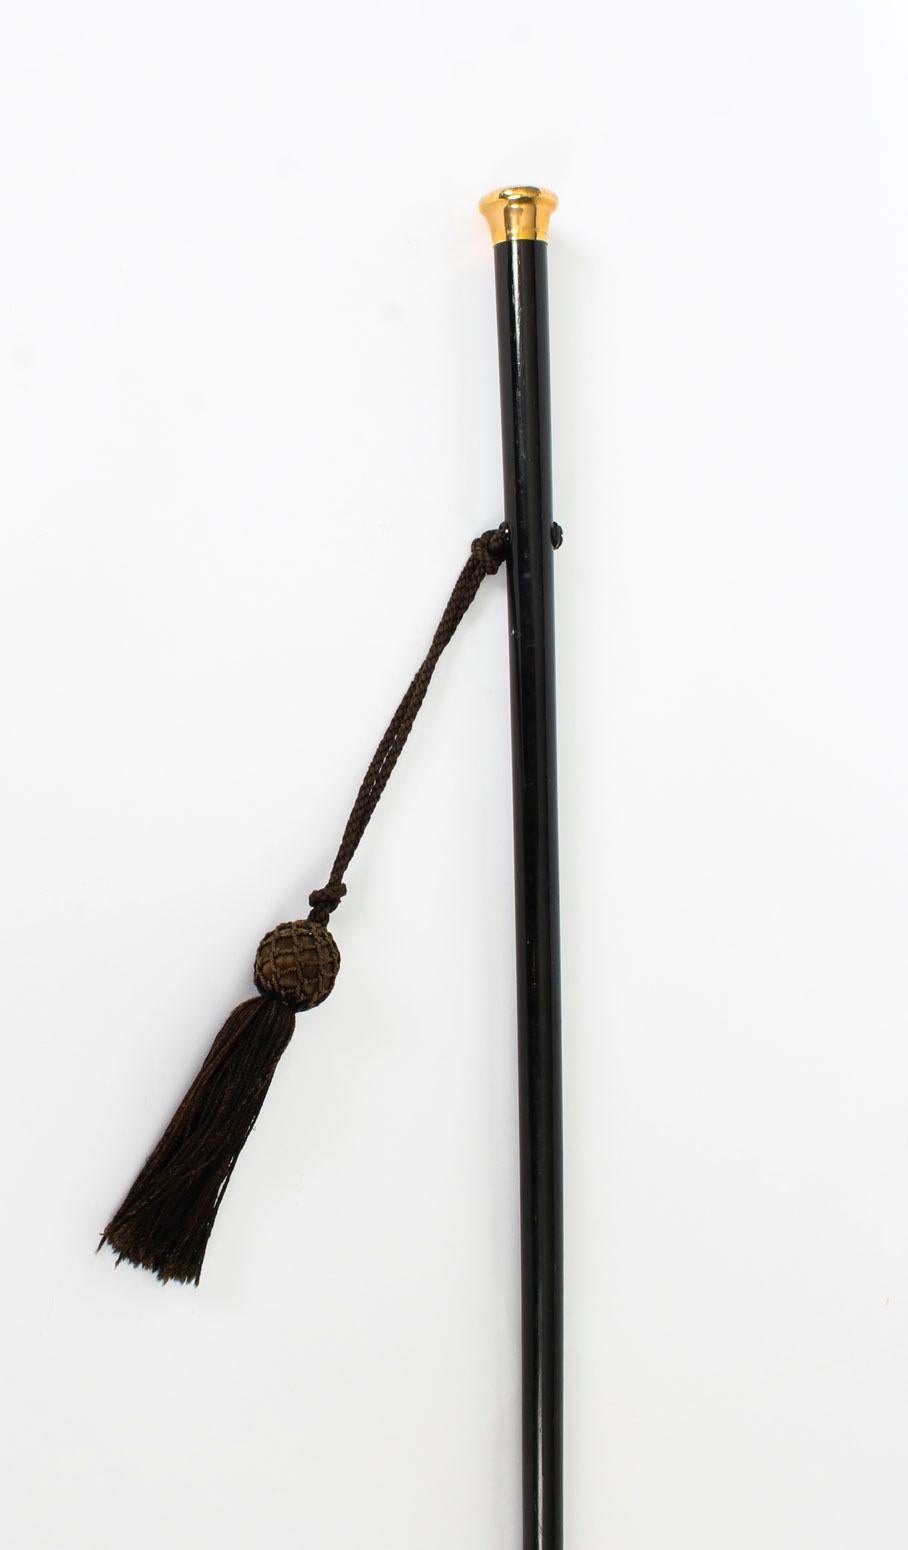 This is a superb antique George V ebonised walking stick with a 9ct gold handle, C1915 in date.

Add this wonderful cane to your collection.

Condition:
In excellent condition with only minor signs of wear commensurate with age and